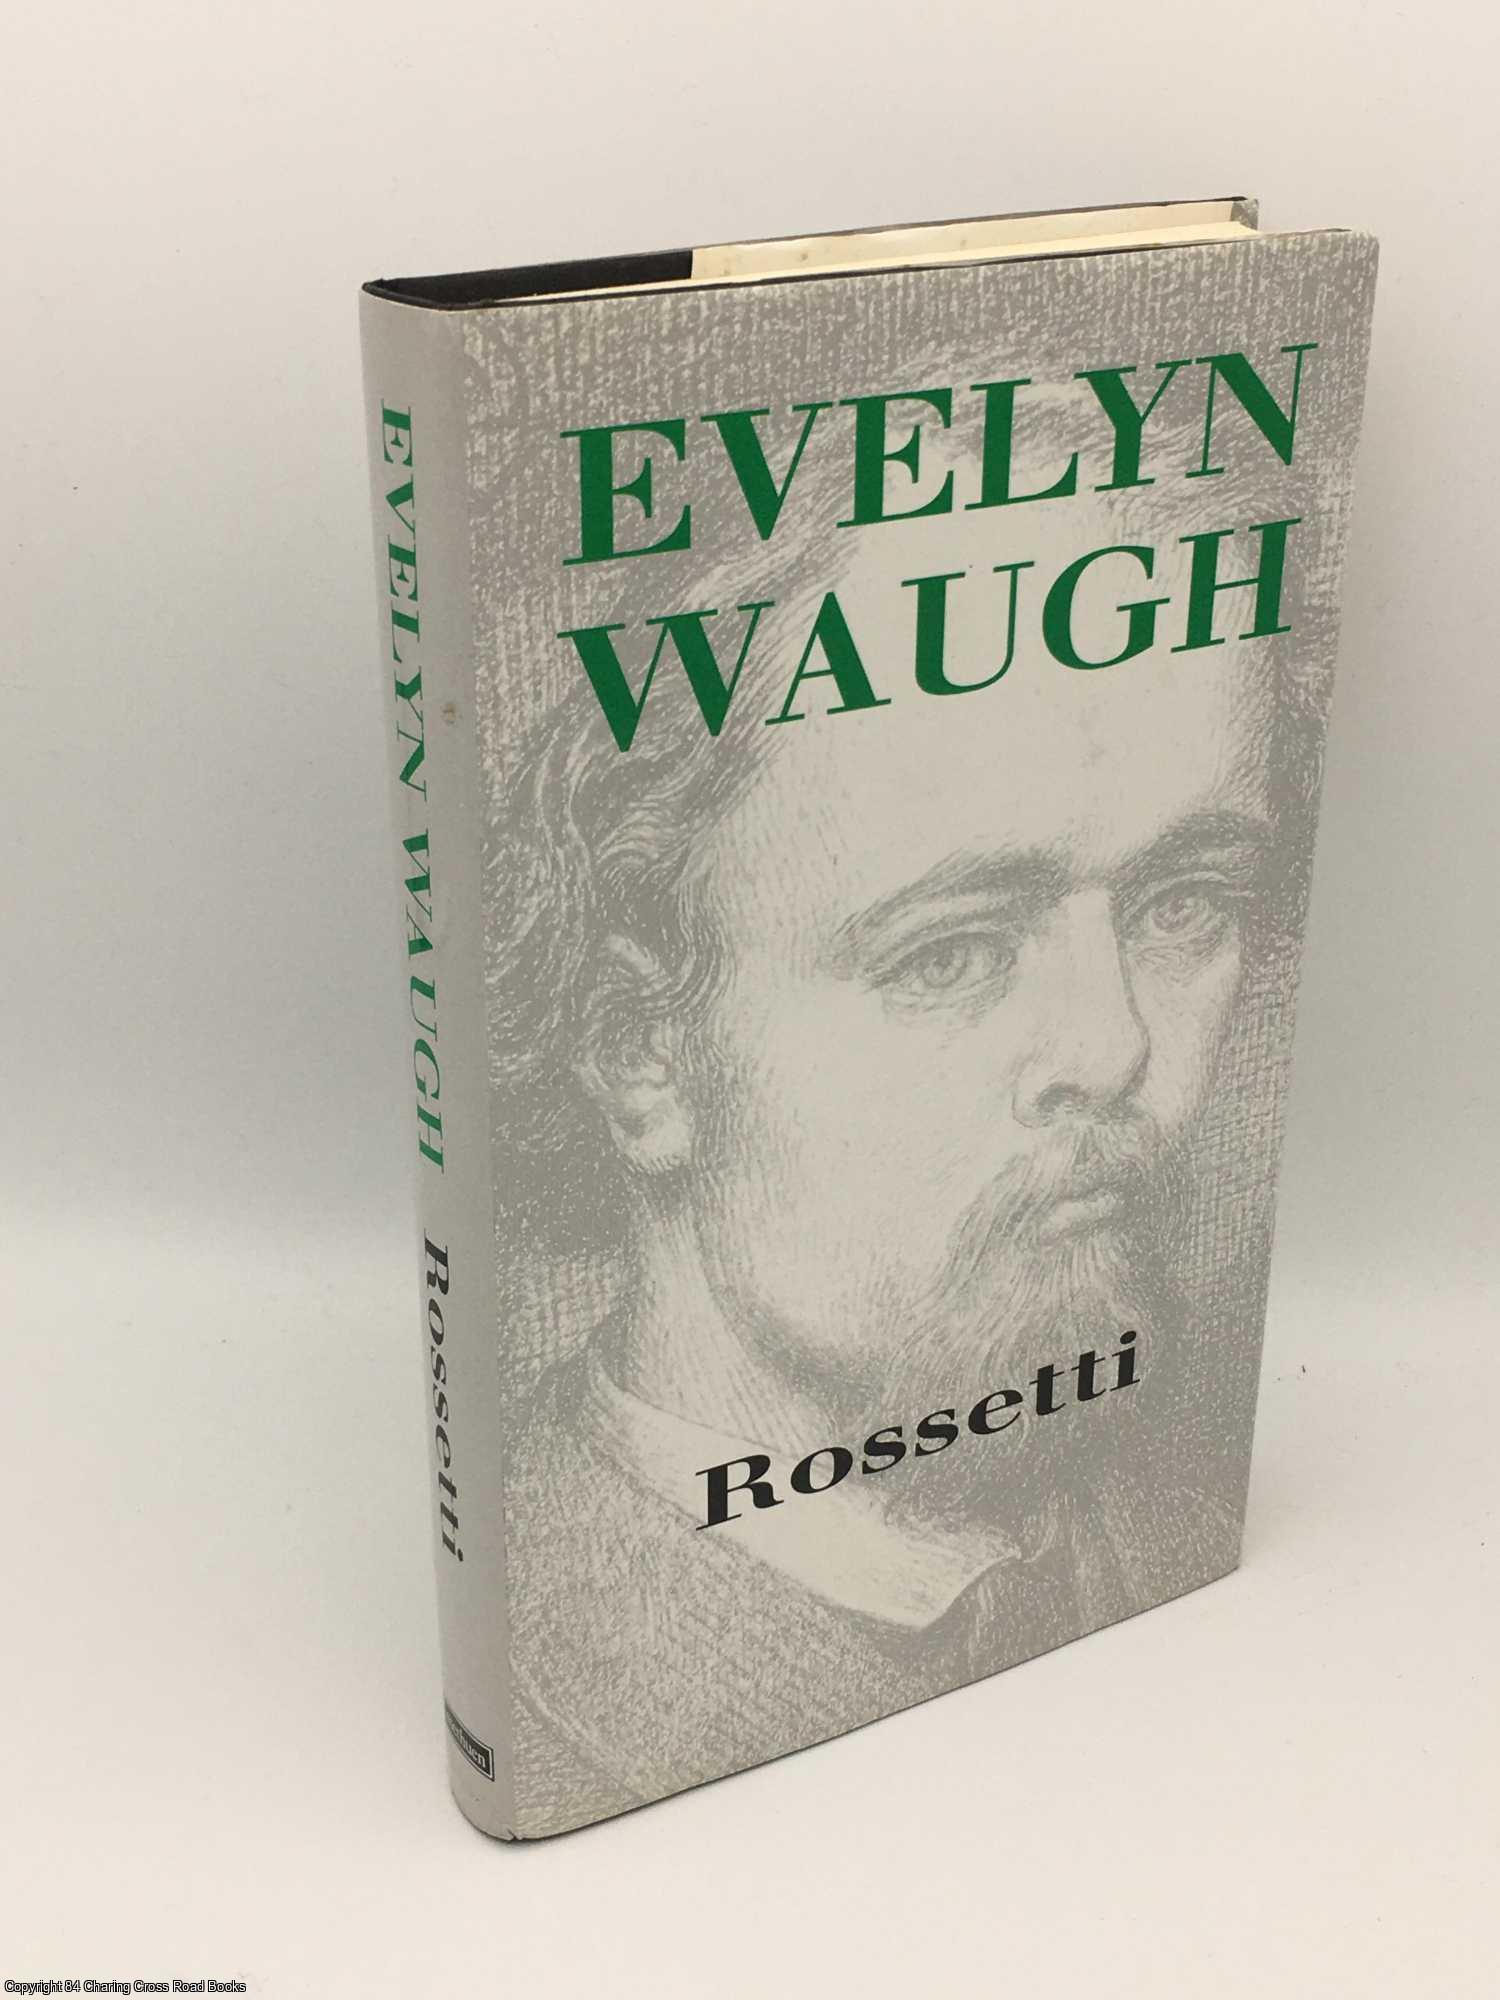 Waugh, Evelyn - Rossetti: His Life and Works